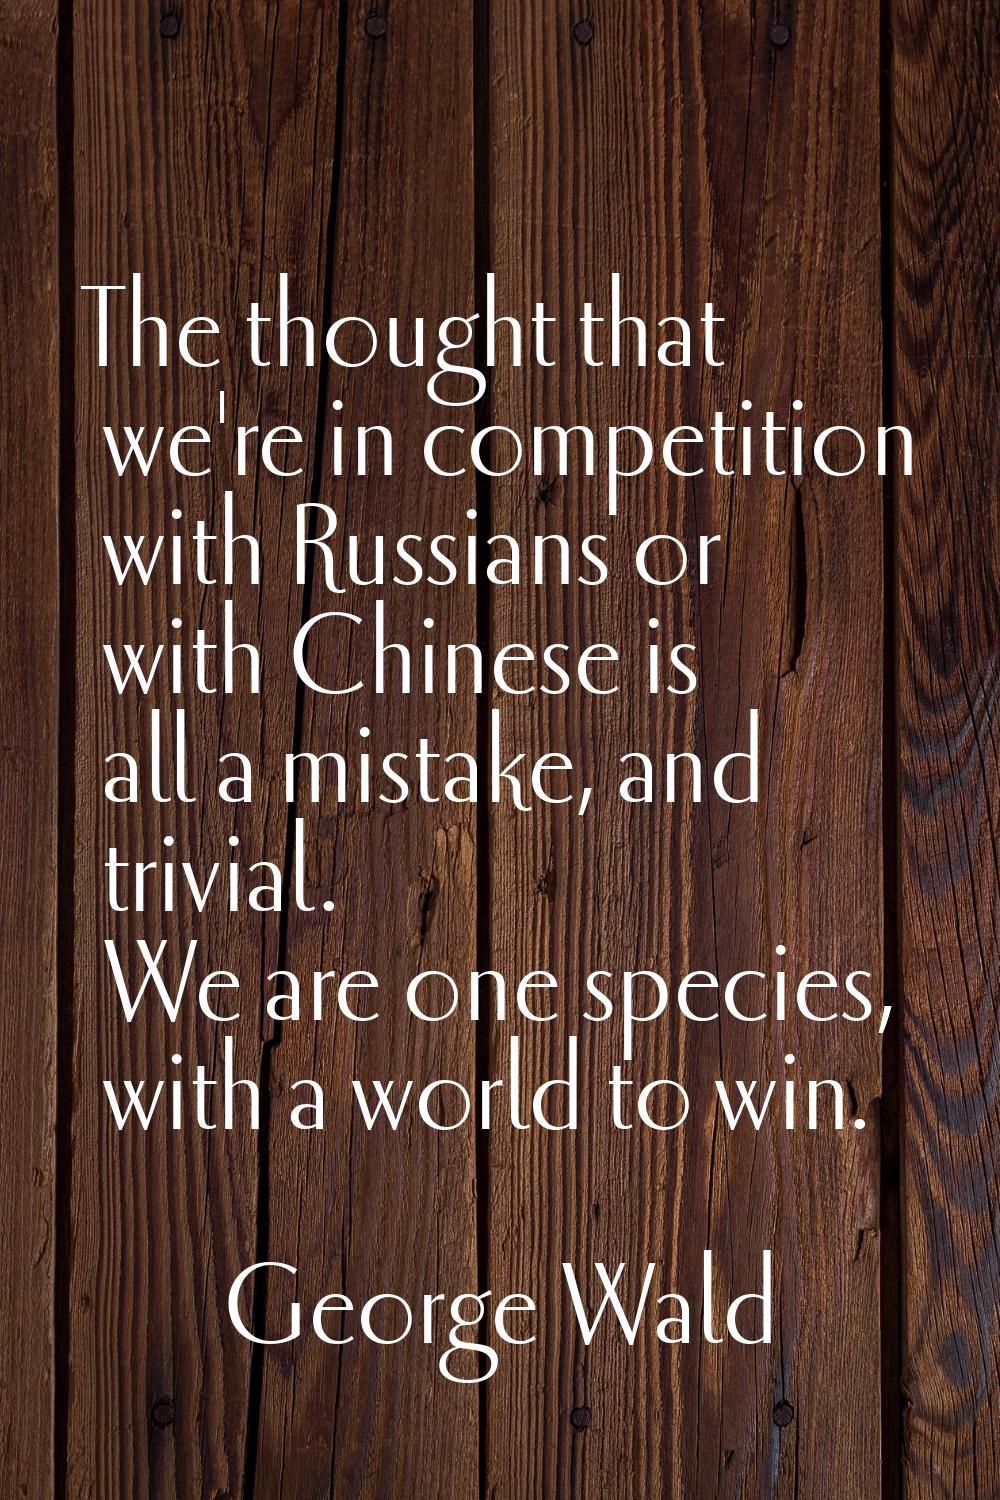 The thought that we're in competition with Russians or with Chinese is all a mistake, and trivial. 